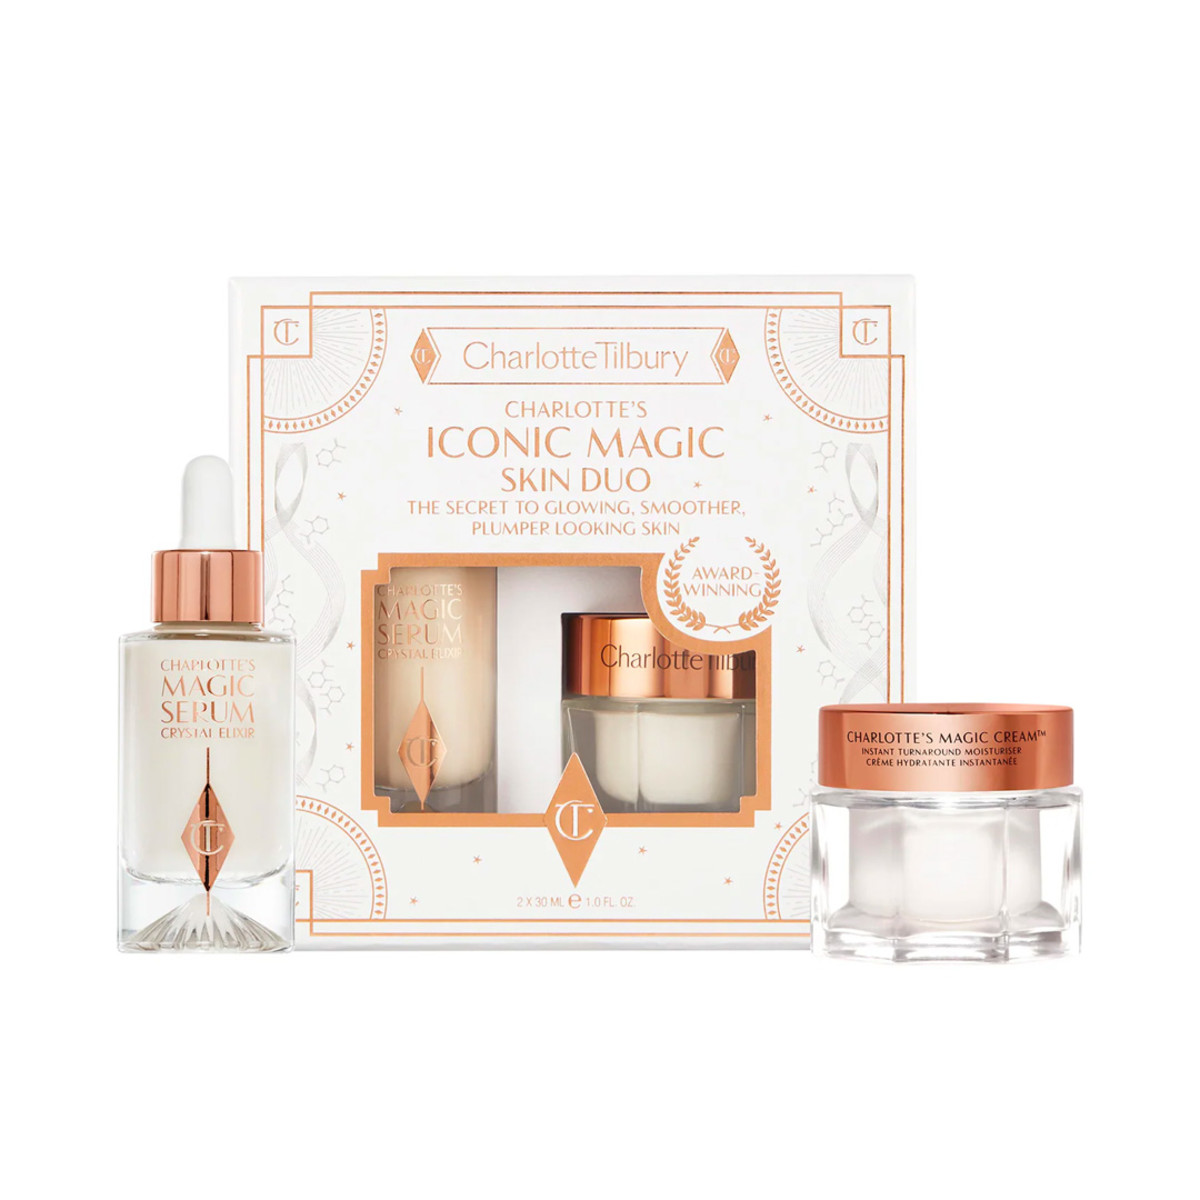 One of the best skincare gift sets for women who love all things beauty, the Charlotte Tilbury Charlotte's Iconic Magic Skin Duo available now at Sephora